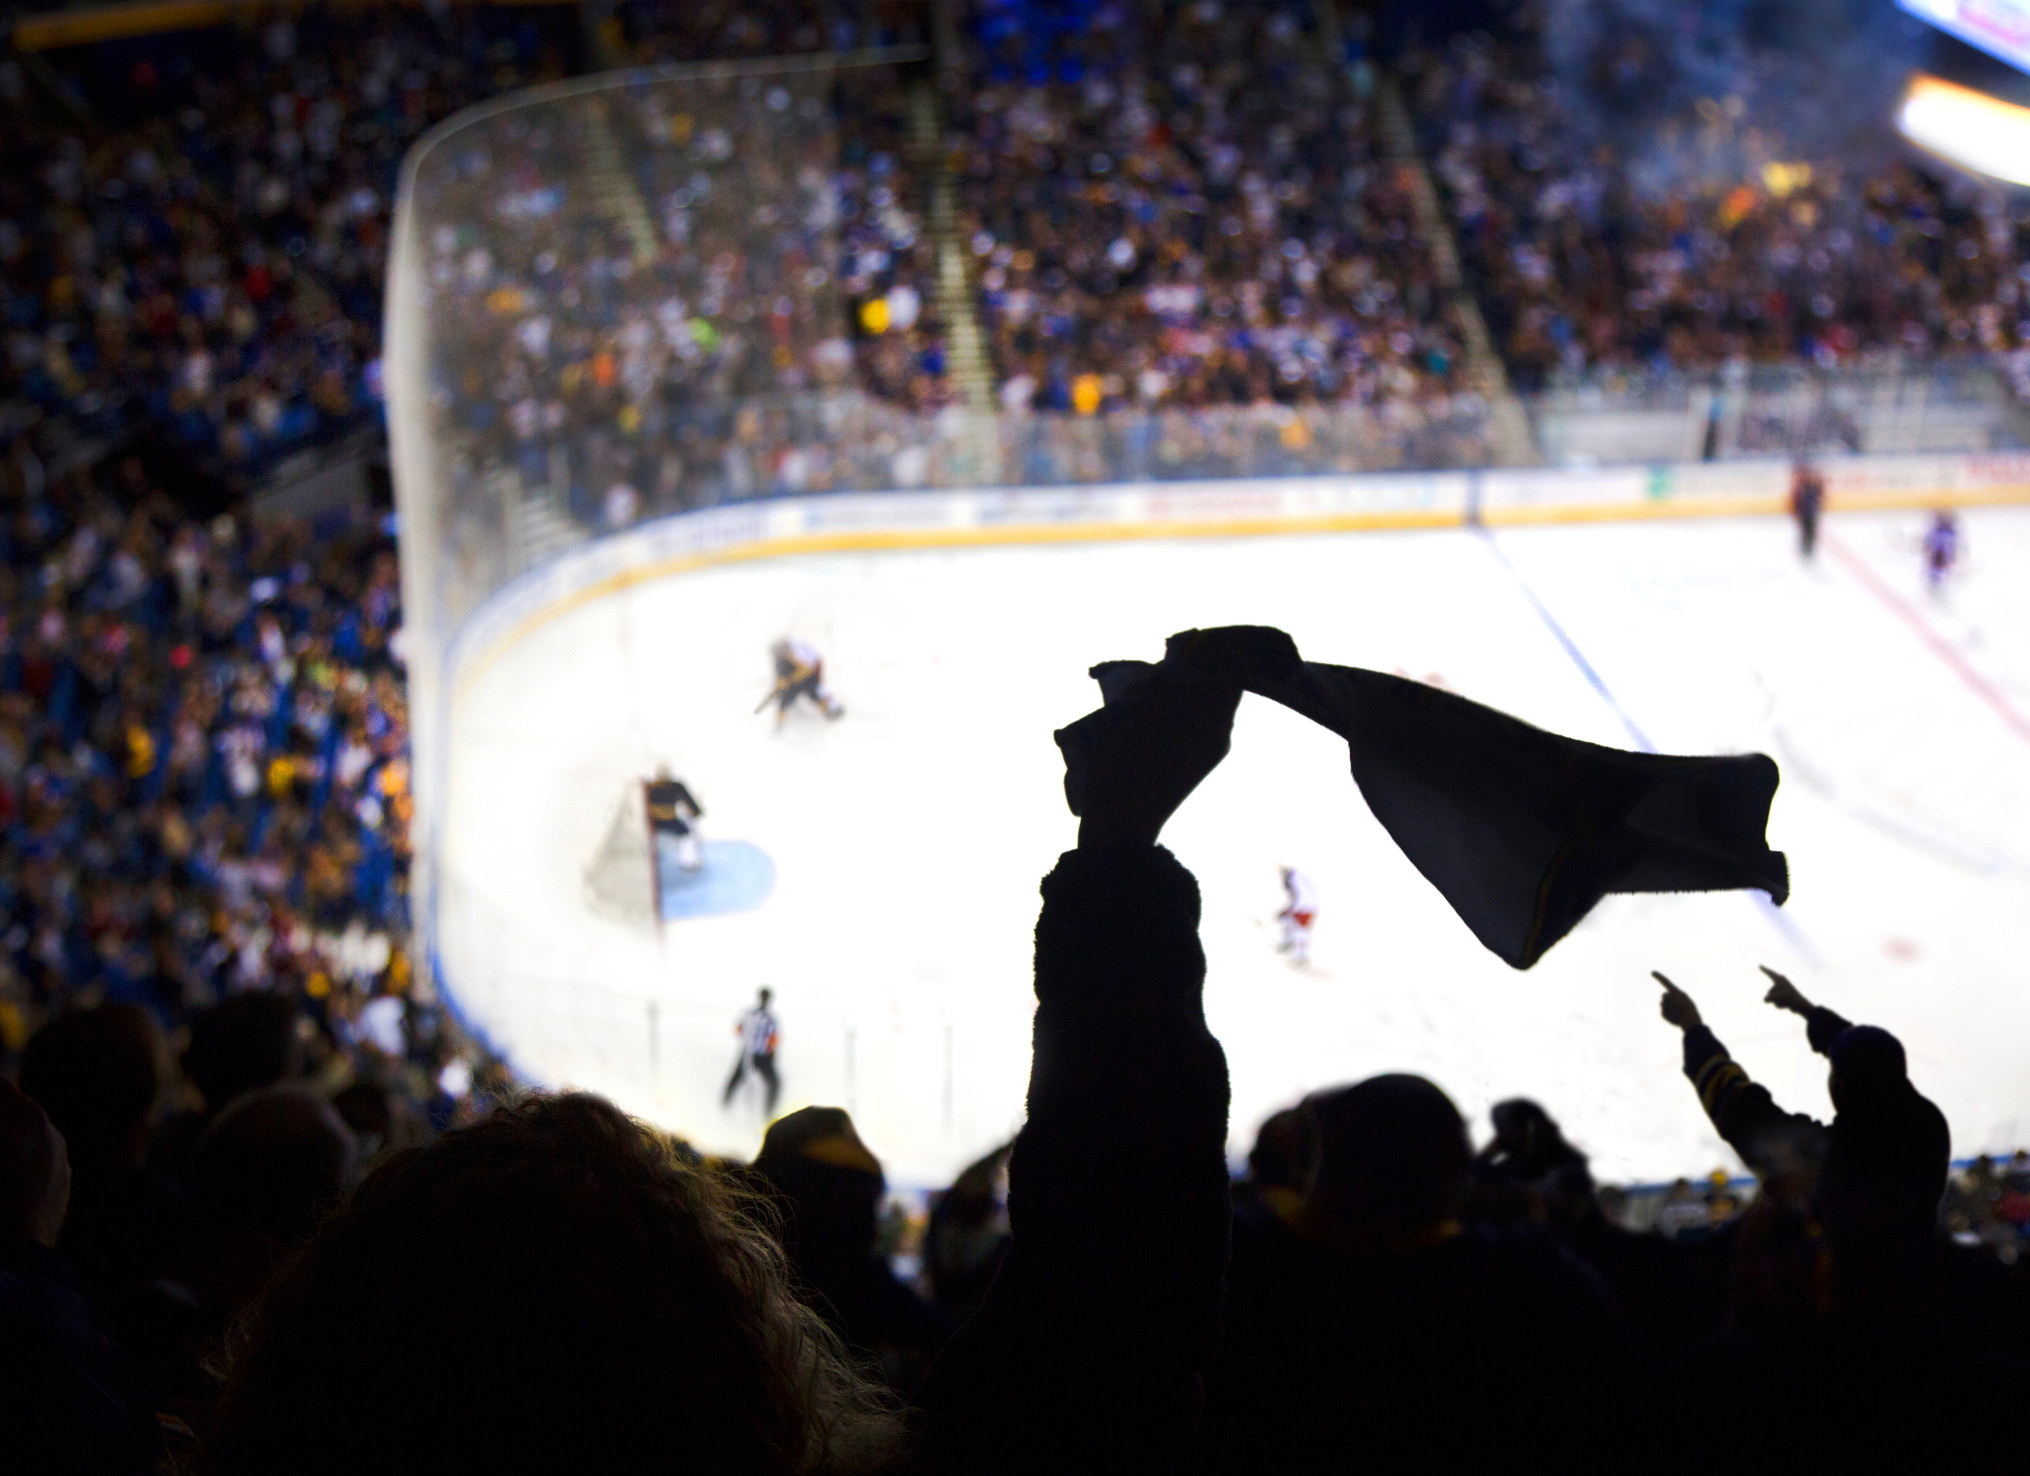 People cheering at a hockey game